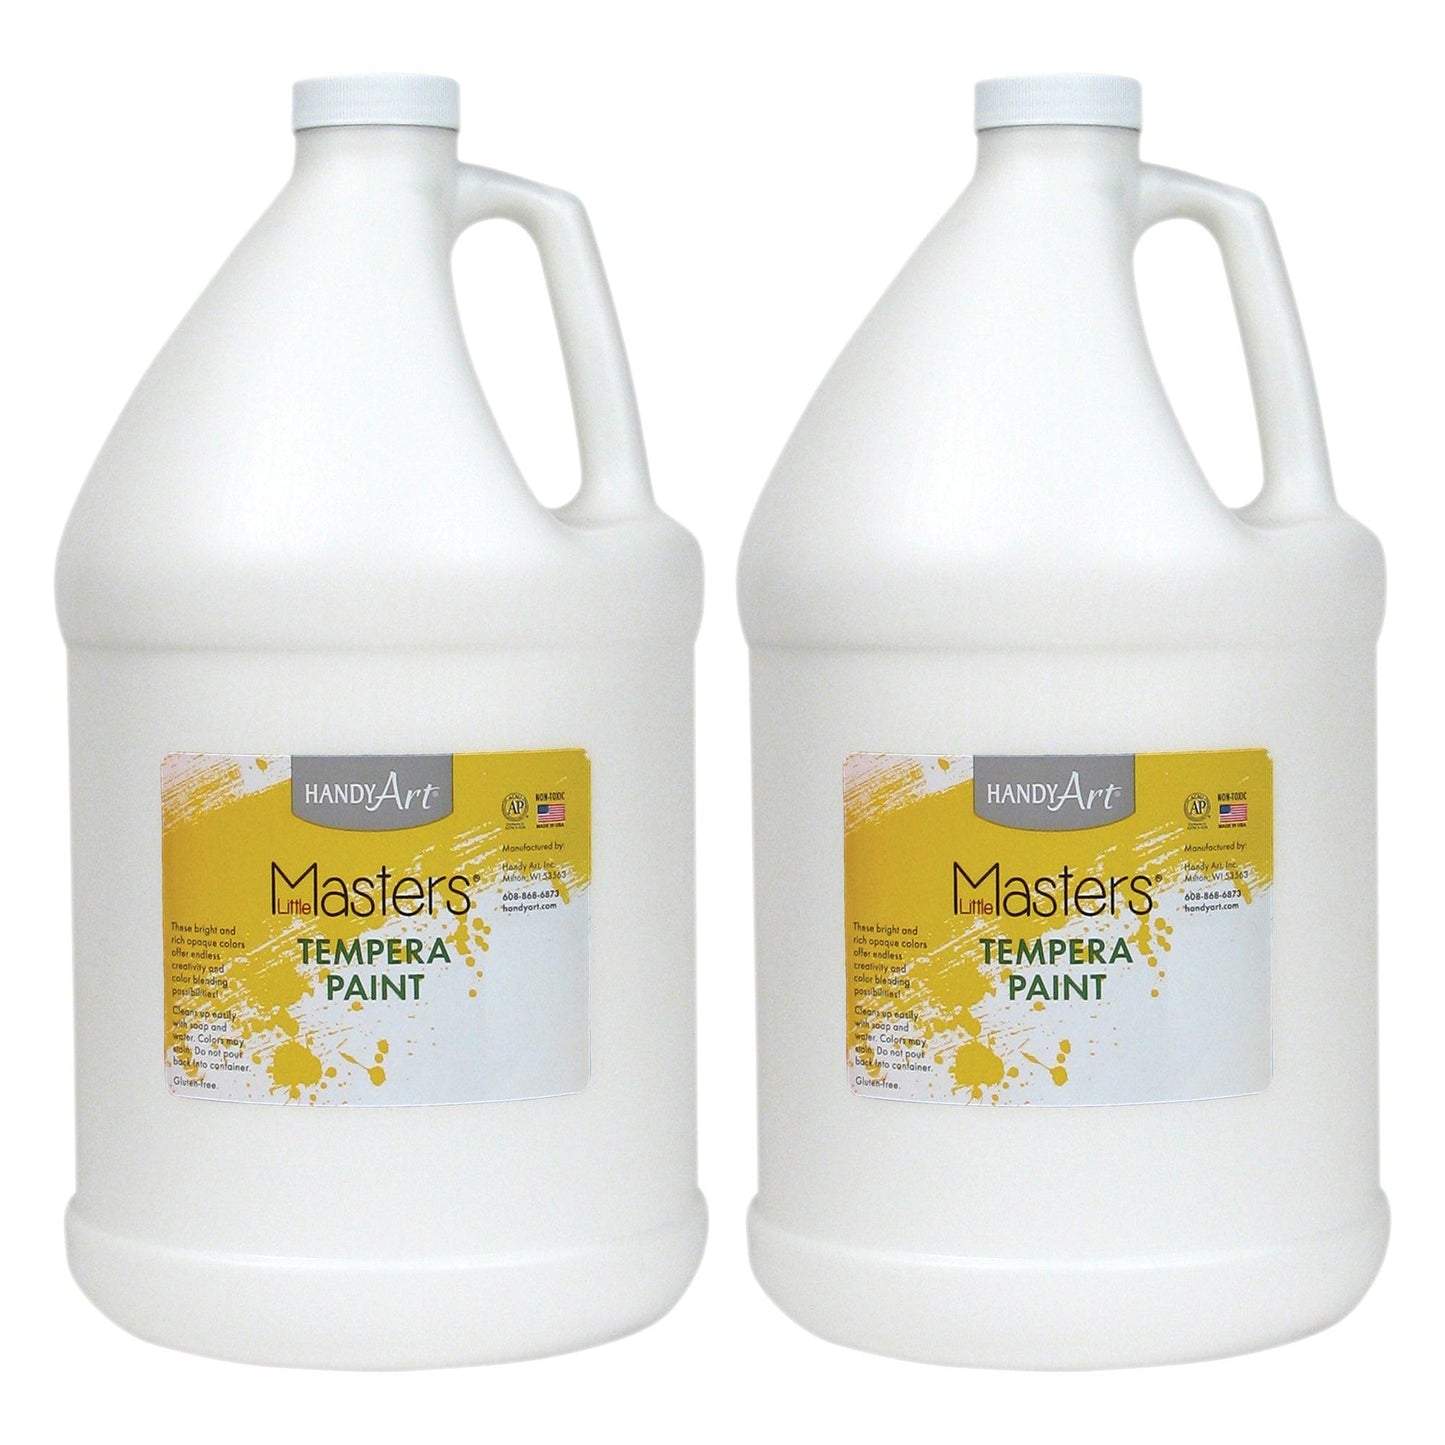 Little Masters® Tempera Paint, White, Gallon, Pack of 2 - Loomini